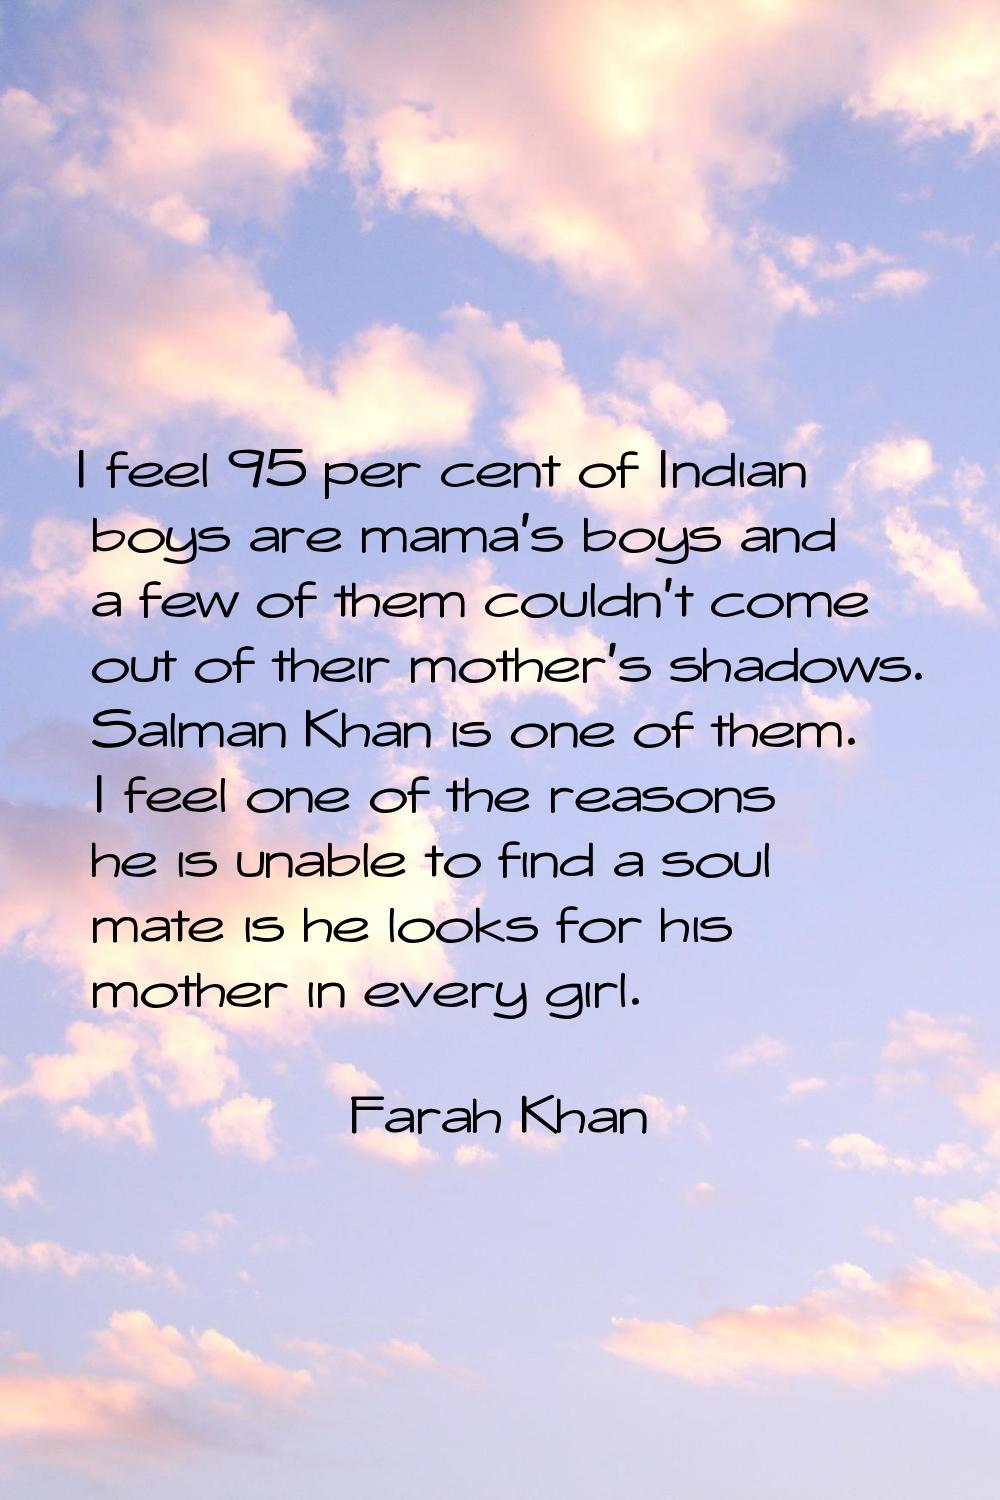 I feel 95 per cent of Indian boys are mama's boys and a few of them couldn't come out of their moth